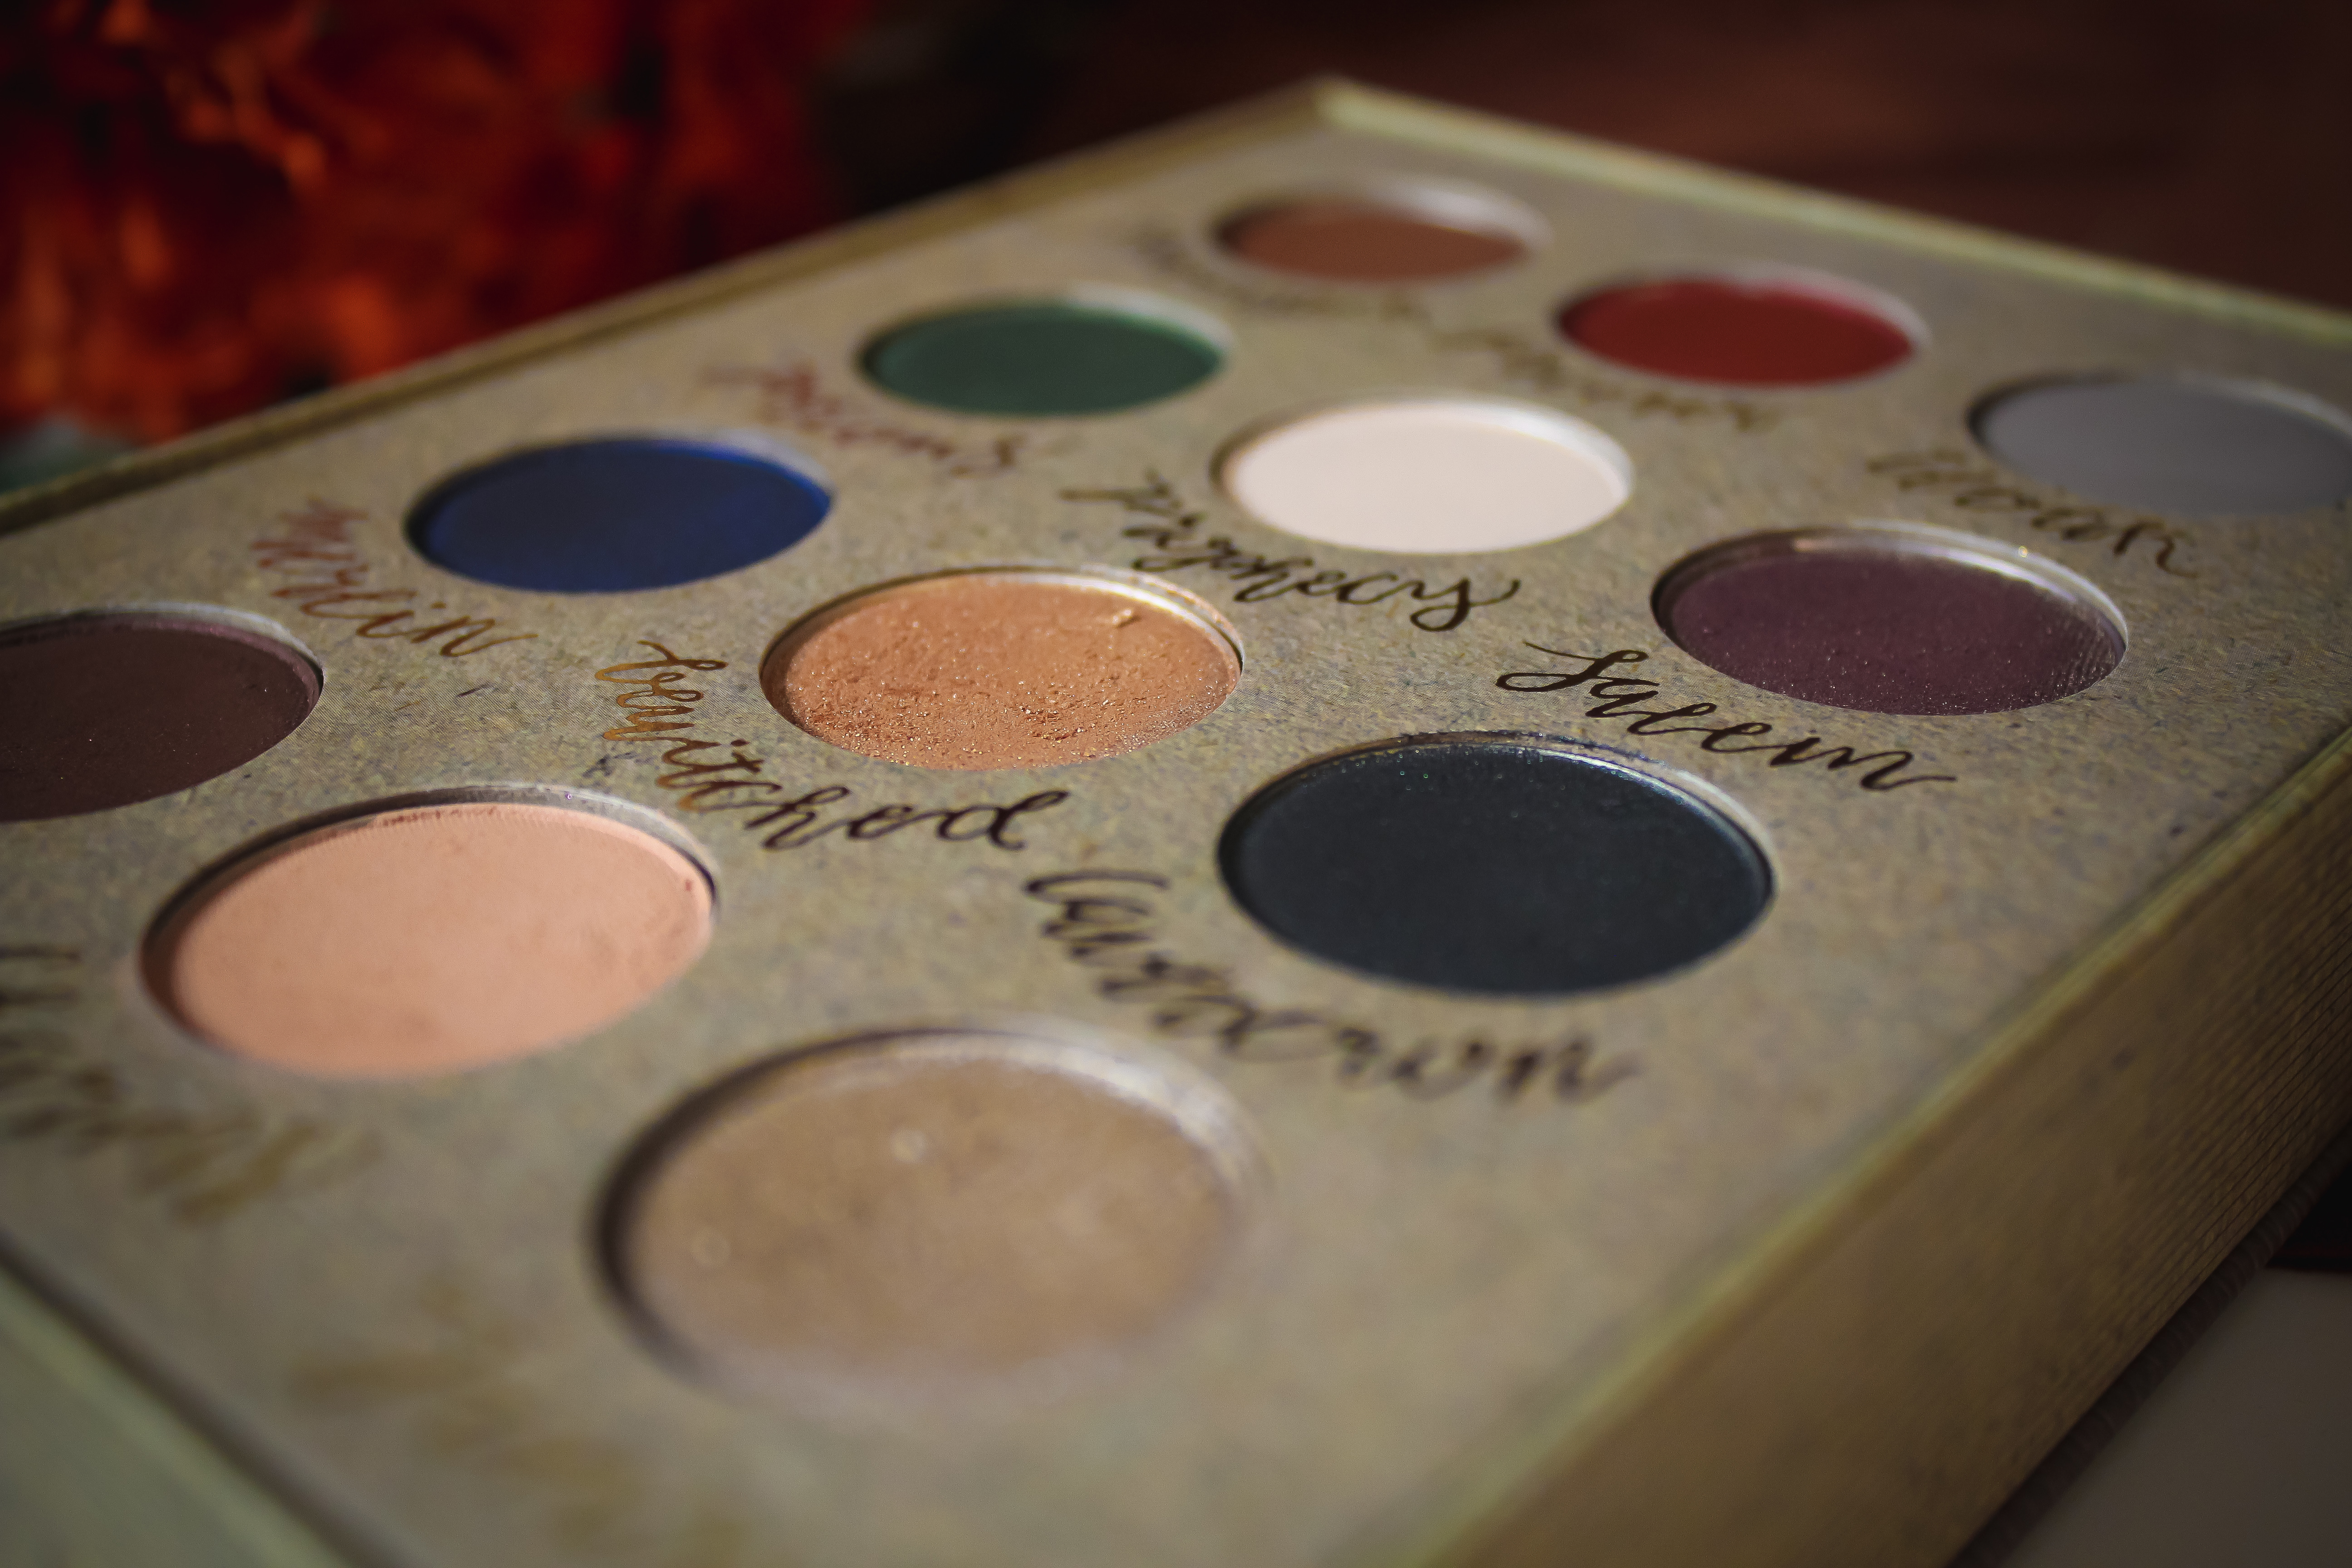 Storybook Cosmetics Wizardry and Witchcraft Palette 5.jpg